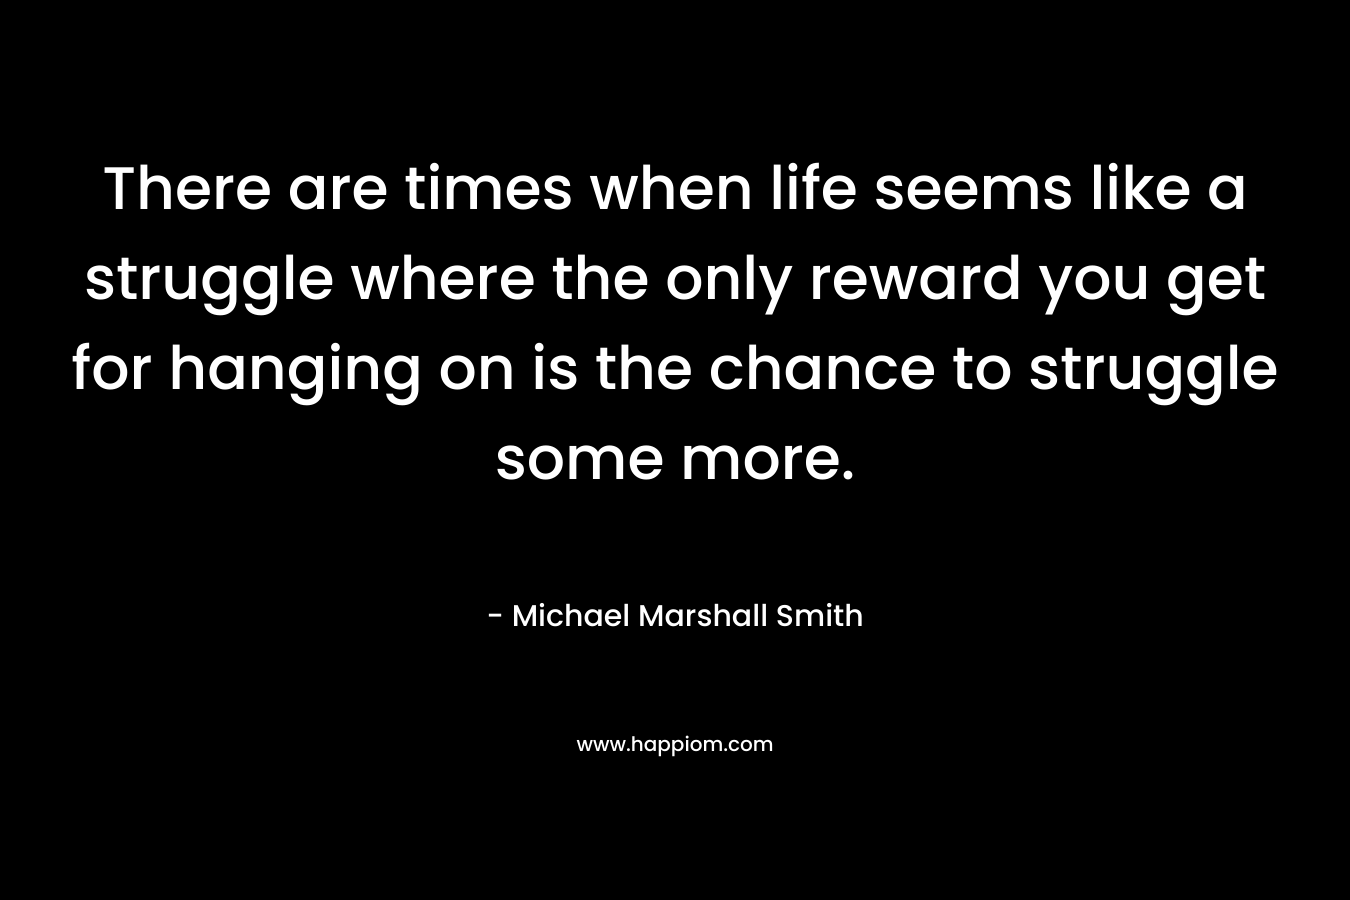 There are times when life seems like a struggle where the only reward you get for hanging on is the chance to struggle some more. – Michael Marshall Smith